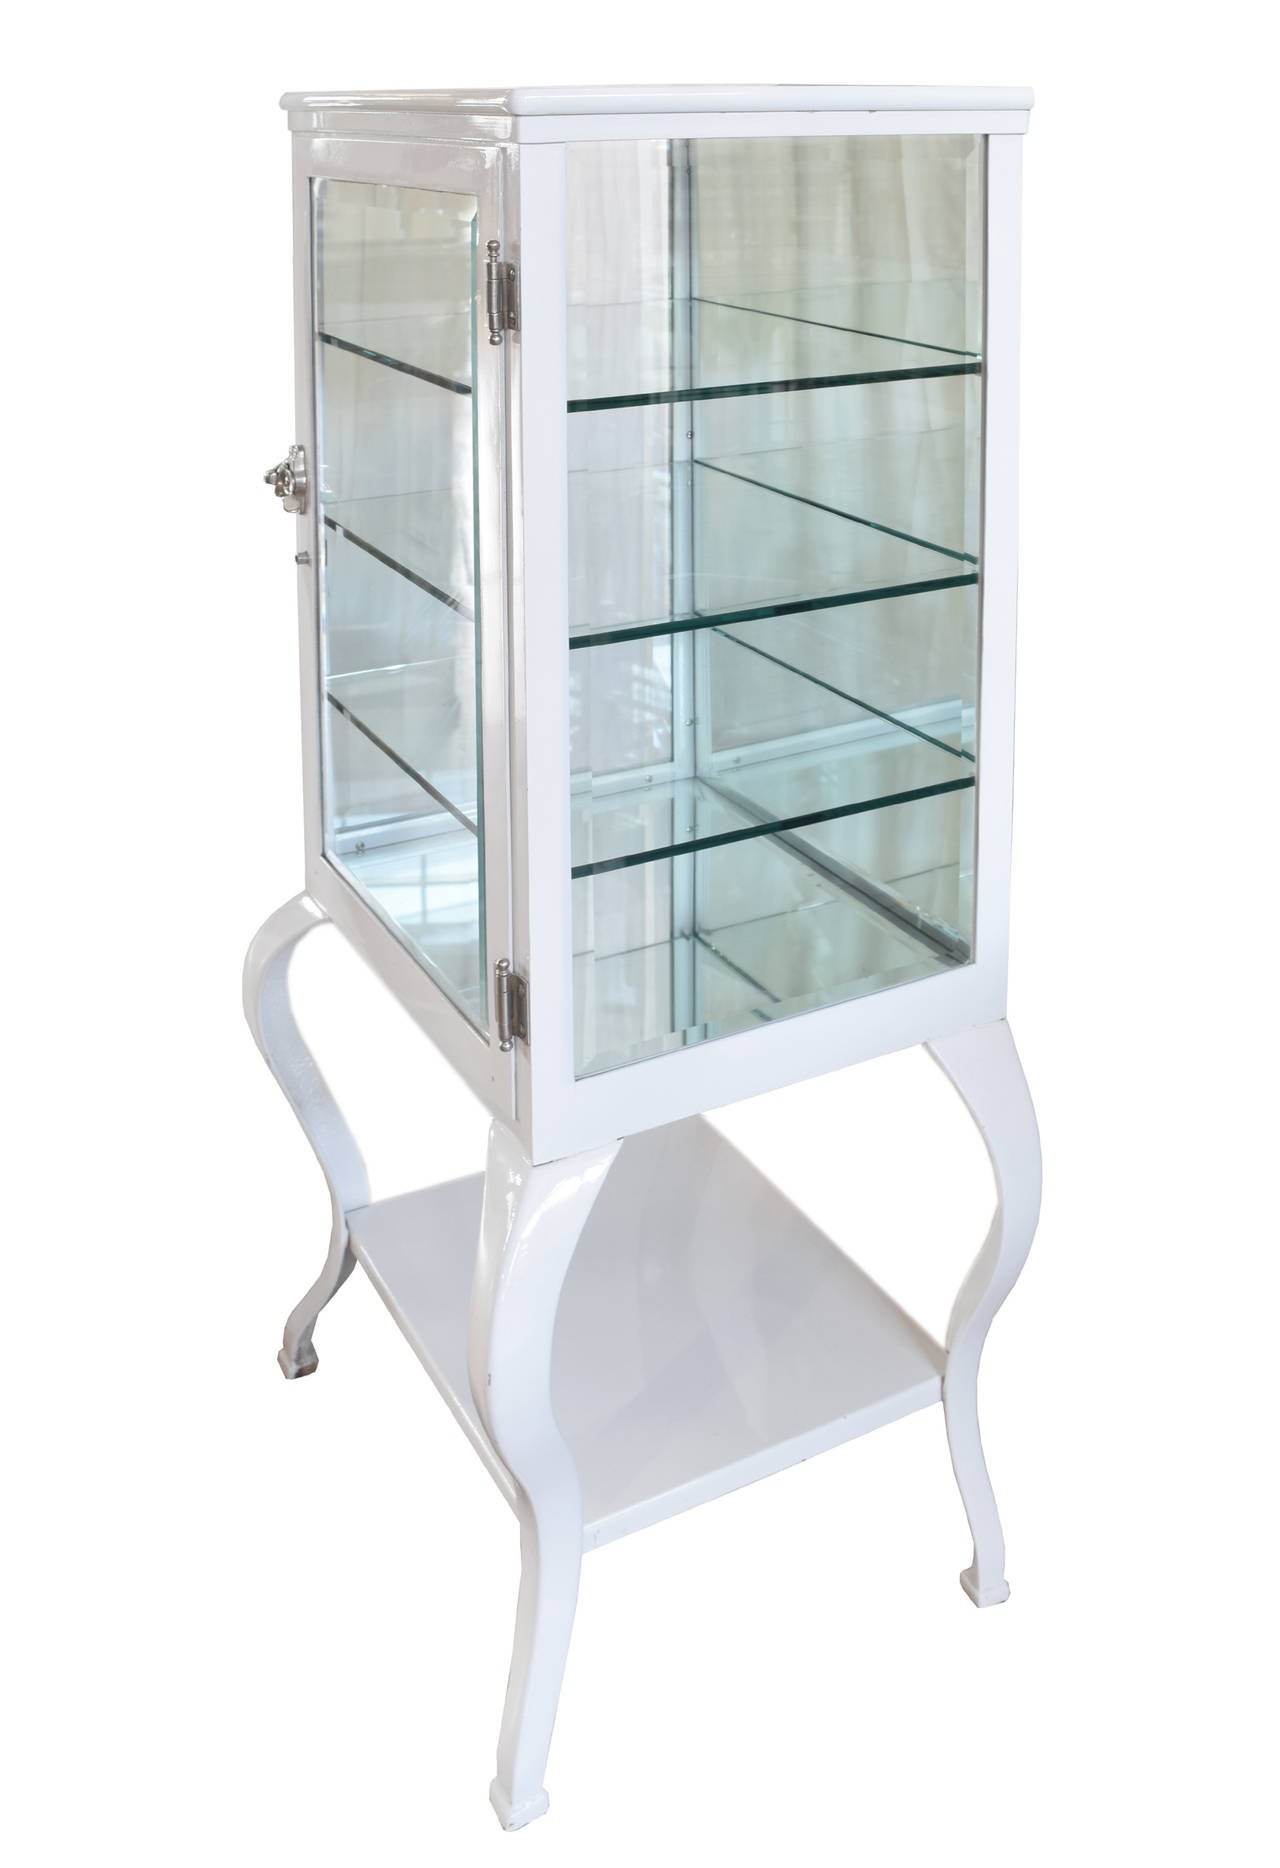 Early 20th century restored and painted display medicine cabinet with one exterior shelf, beveled glass sides, beveled glass door, mirrored back and three interior glass shelves.